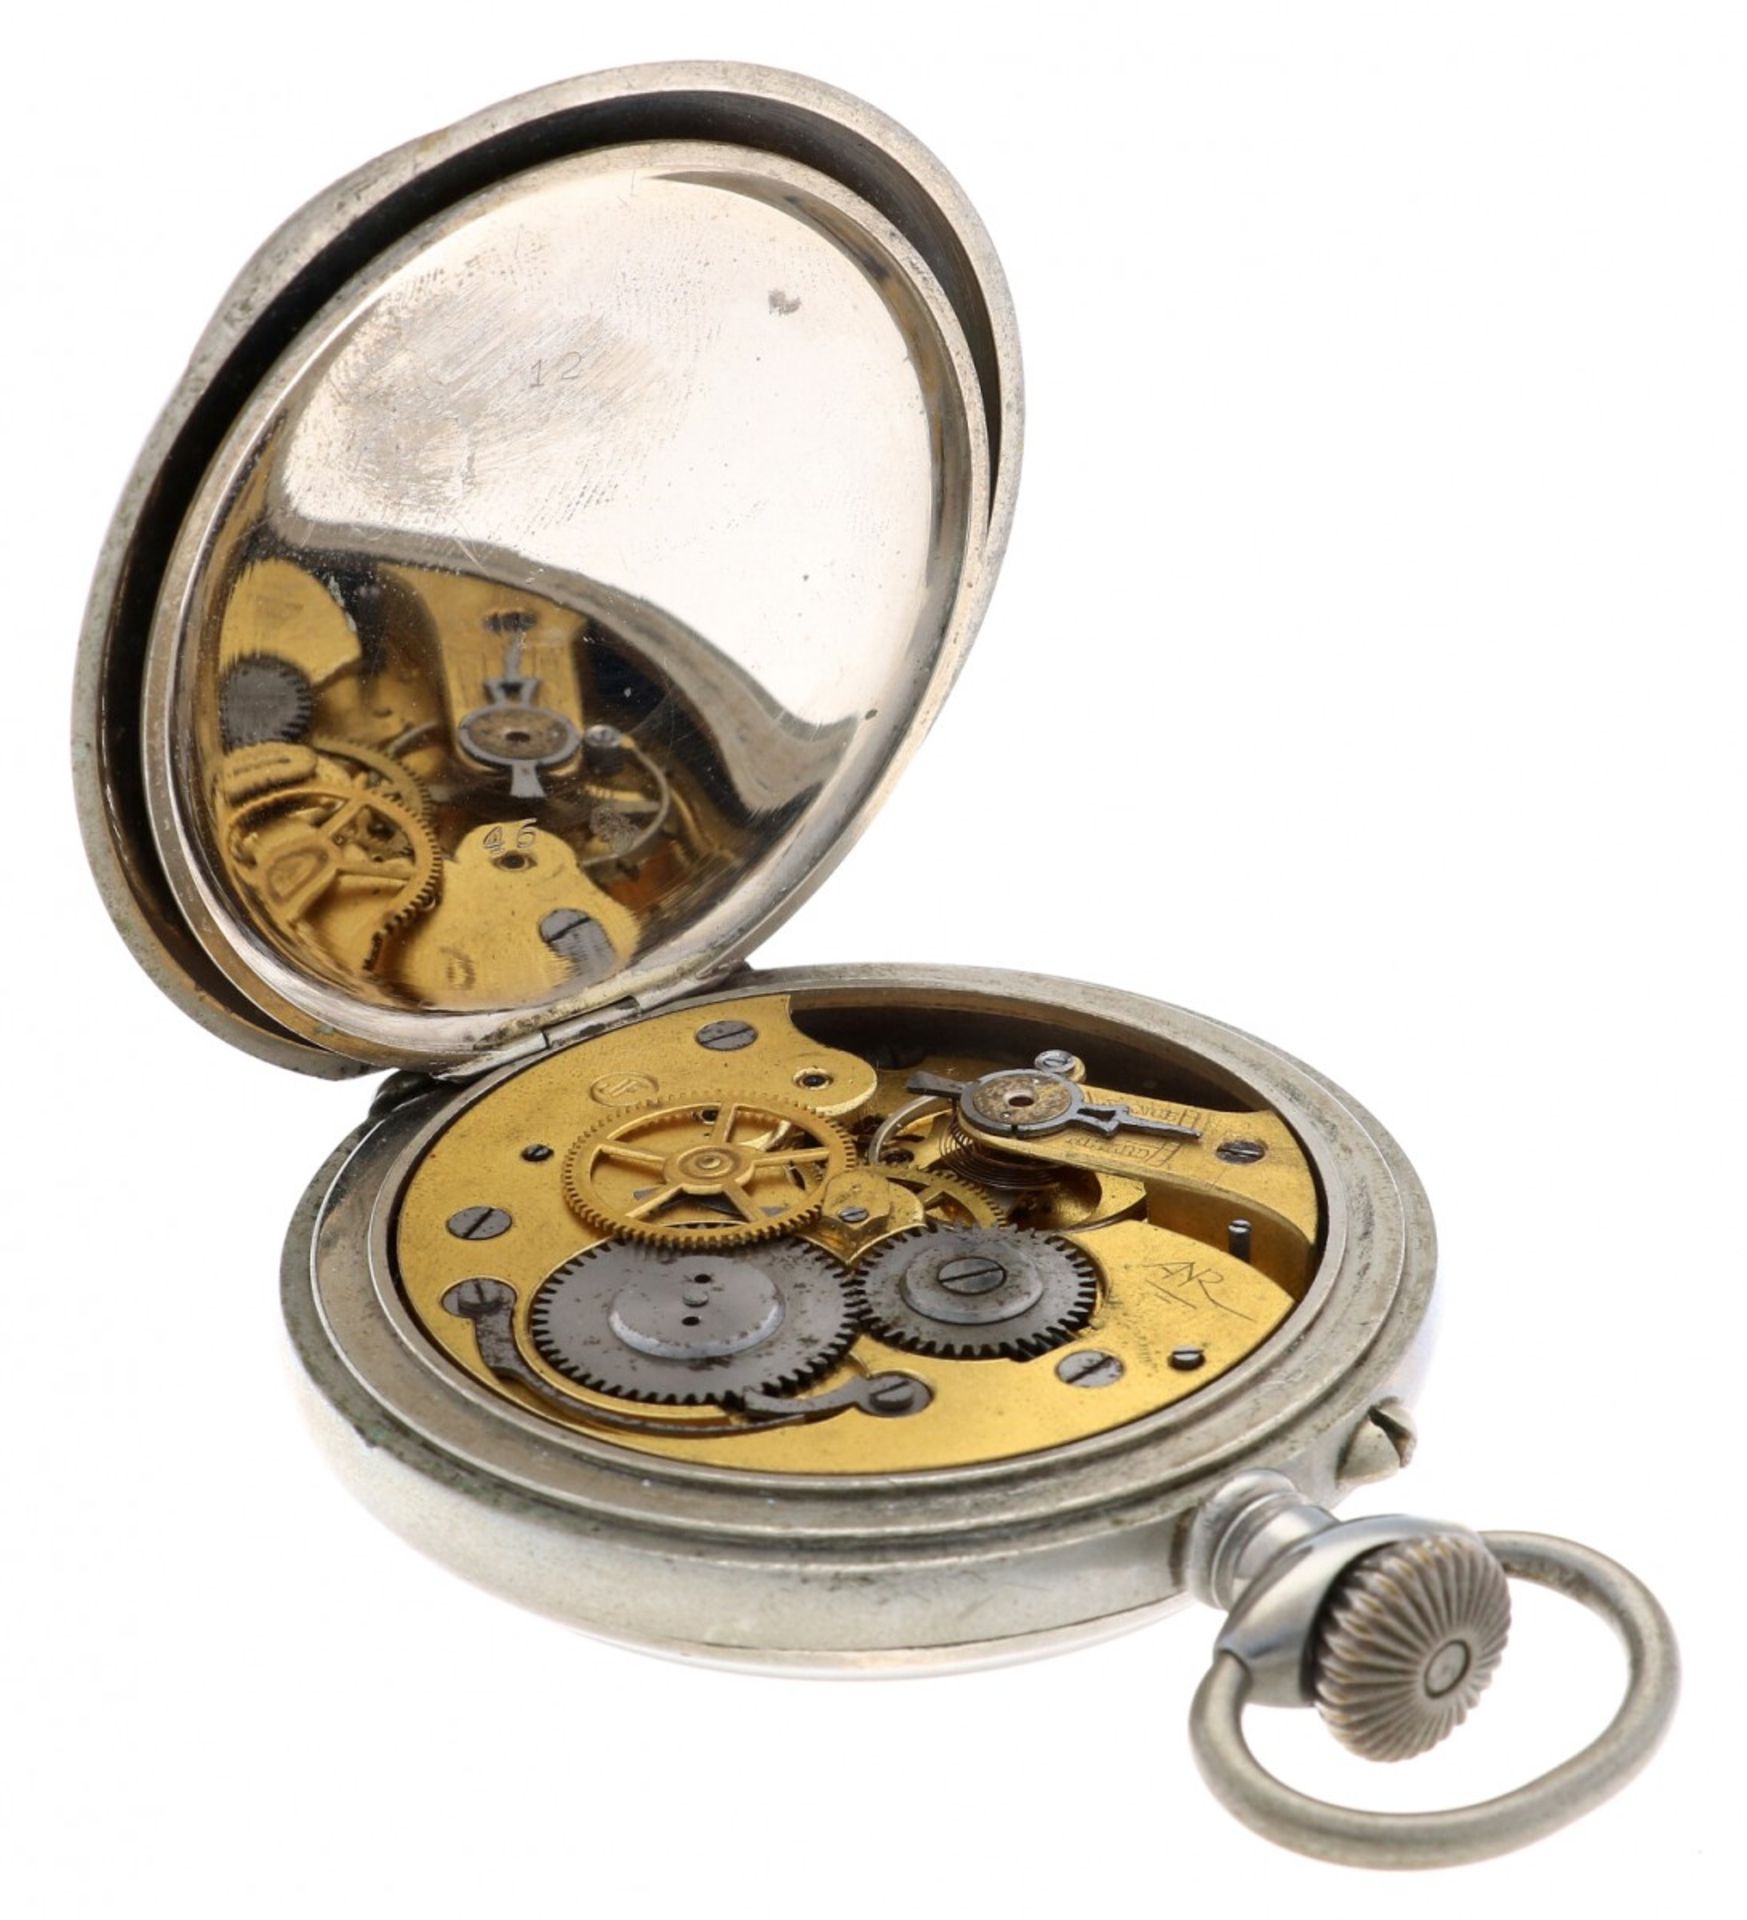 Pocket Watch Swiss Ankergang, 'Japy Freres, Colombophile' - ca. 1850 - Image 4 of 5